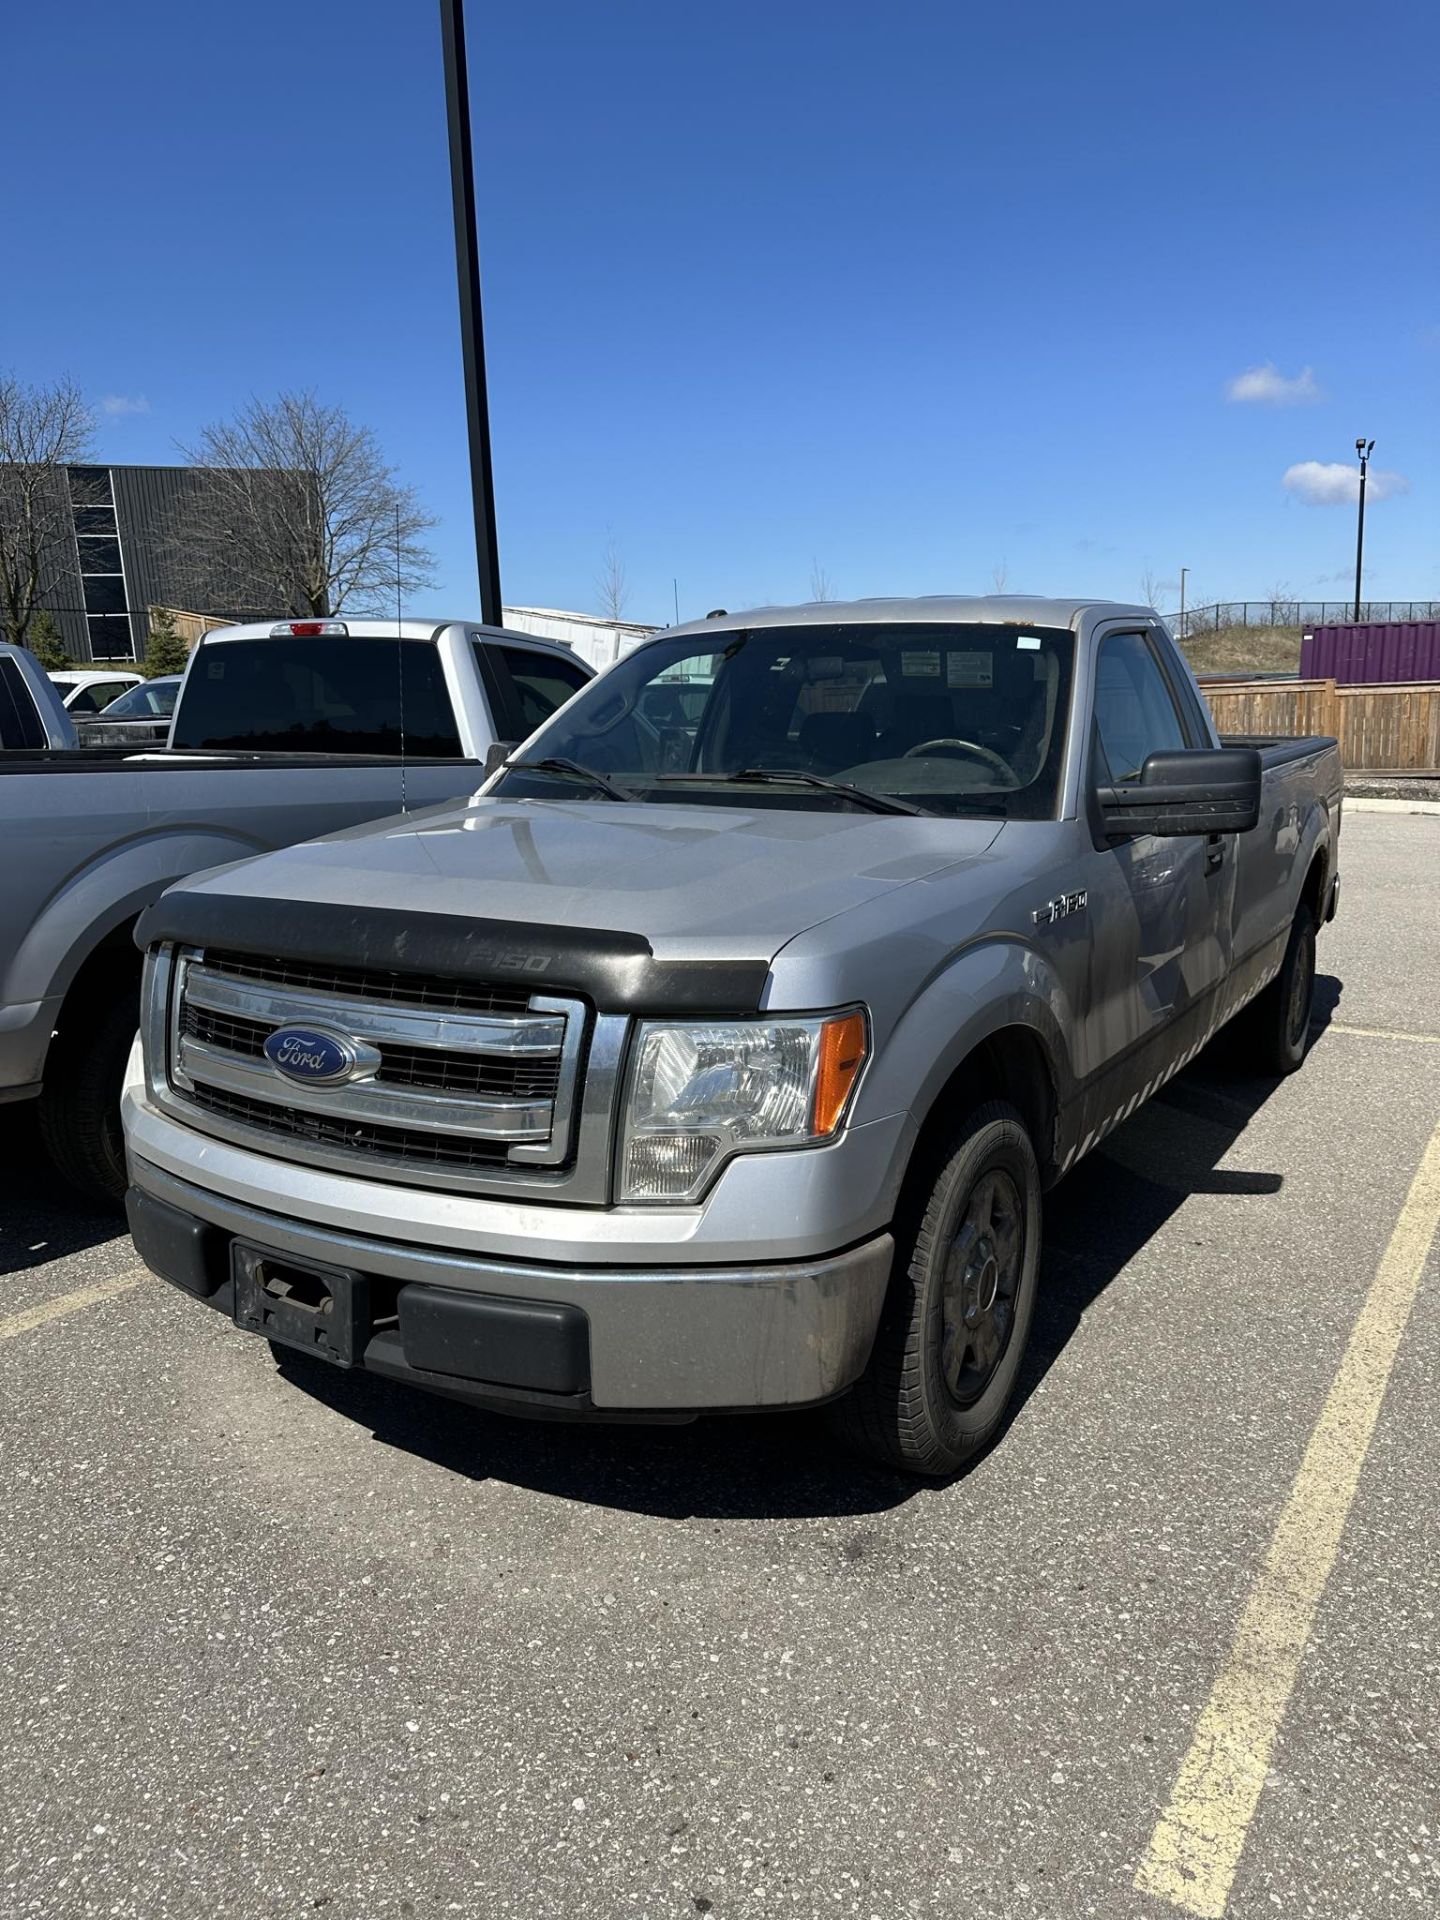 2014 FORD F150 PICKUP TRUCK, APPROX. 335,932KMS, VIN# 1FTMF1DE6EKD12846 (NO BLACK TOOLBOXES)